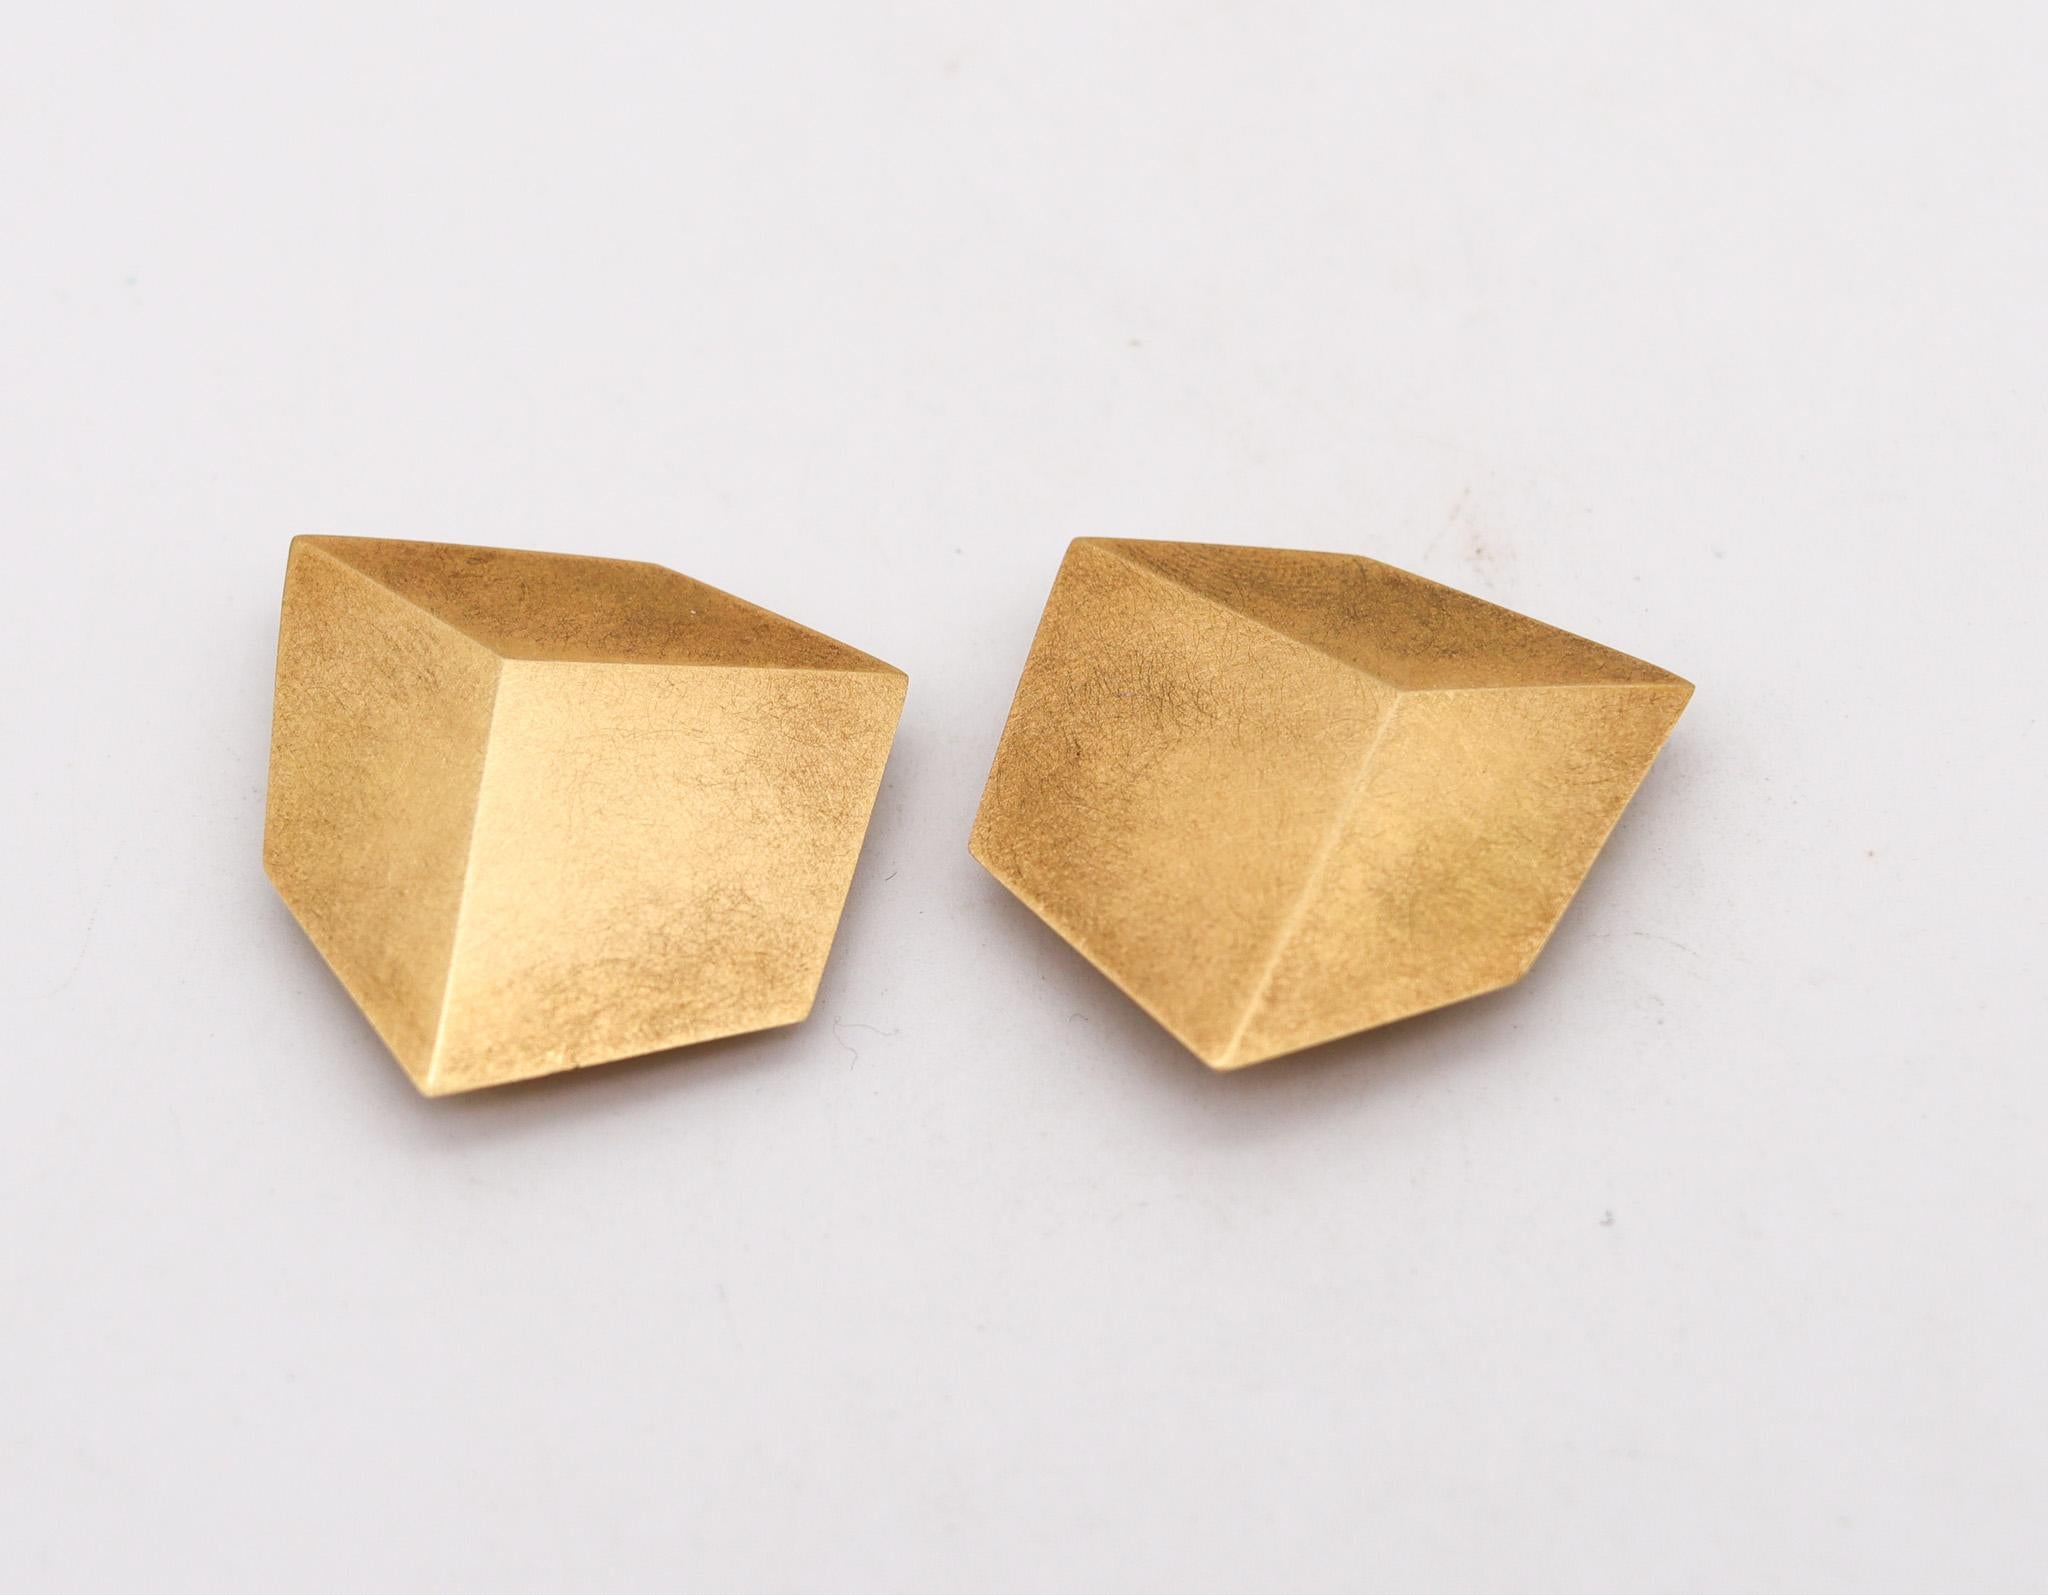 Trompe L'Oeil earrings designed by Francoise et Claude Chavent (1947-)

Fabulous and very rare vintage piece, created in Montpellier France by the artist and goldsmith Francoise and Claude Chavent, back in the 1980. These sculptural clips earrings